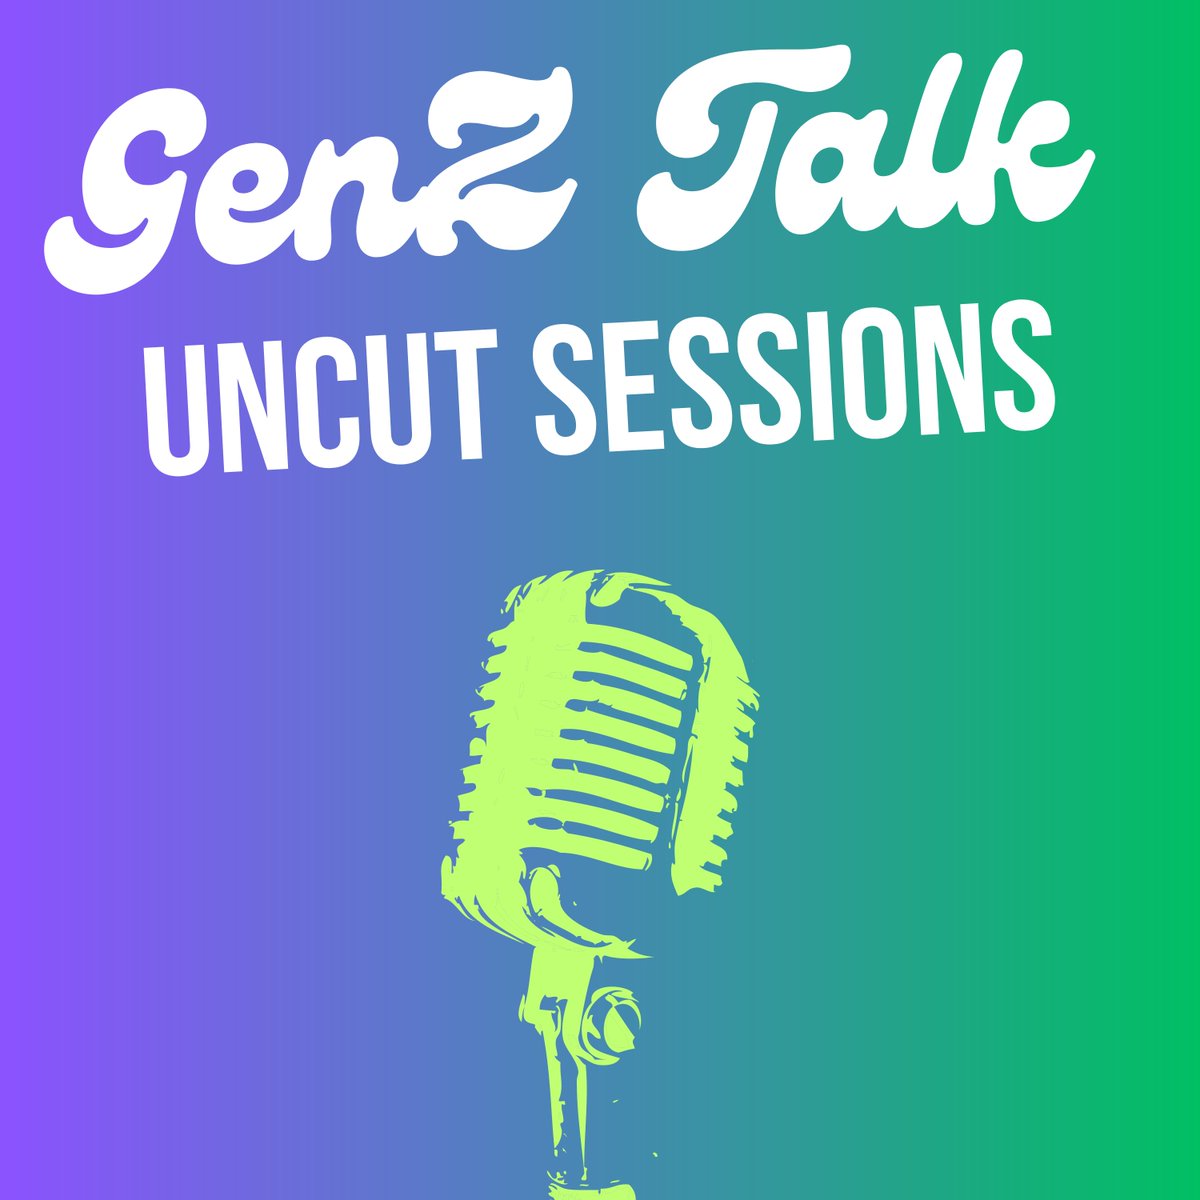 Arty Refugees Stories - Luis Cernuda GenZ Talks - Uncut Sessions with Cassia Jefferson (One from the archives) 🎧👇 arts4refugees.substack.com/p/arty-refugee… Internship with @OxfordCareers #arts4refugees #luiscernuda #lambdaliterary #podcasts #lgbtqpoet